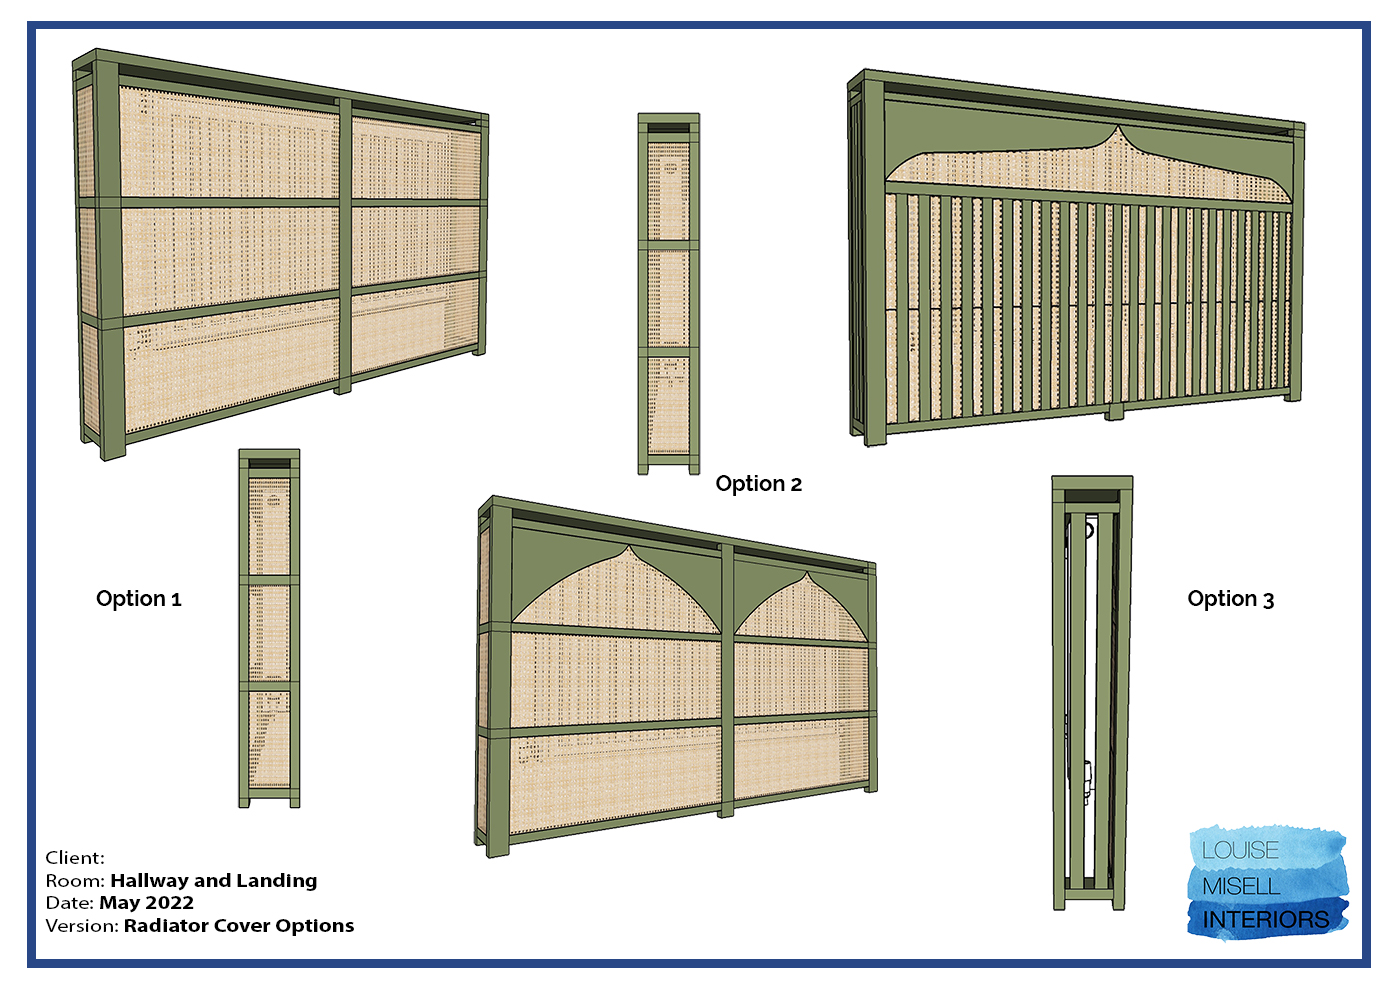 A document showing the three radiator cover design options, with both front and side views.